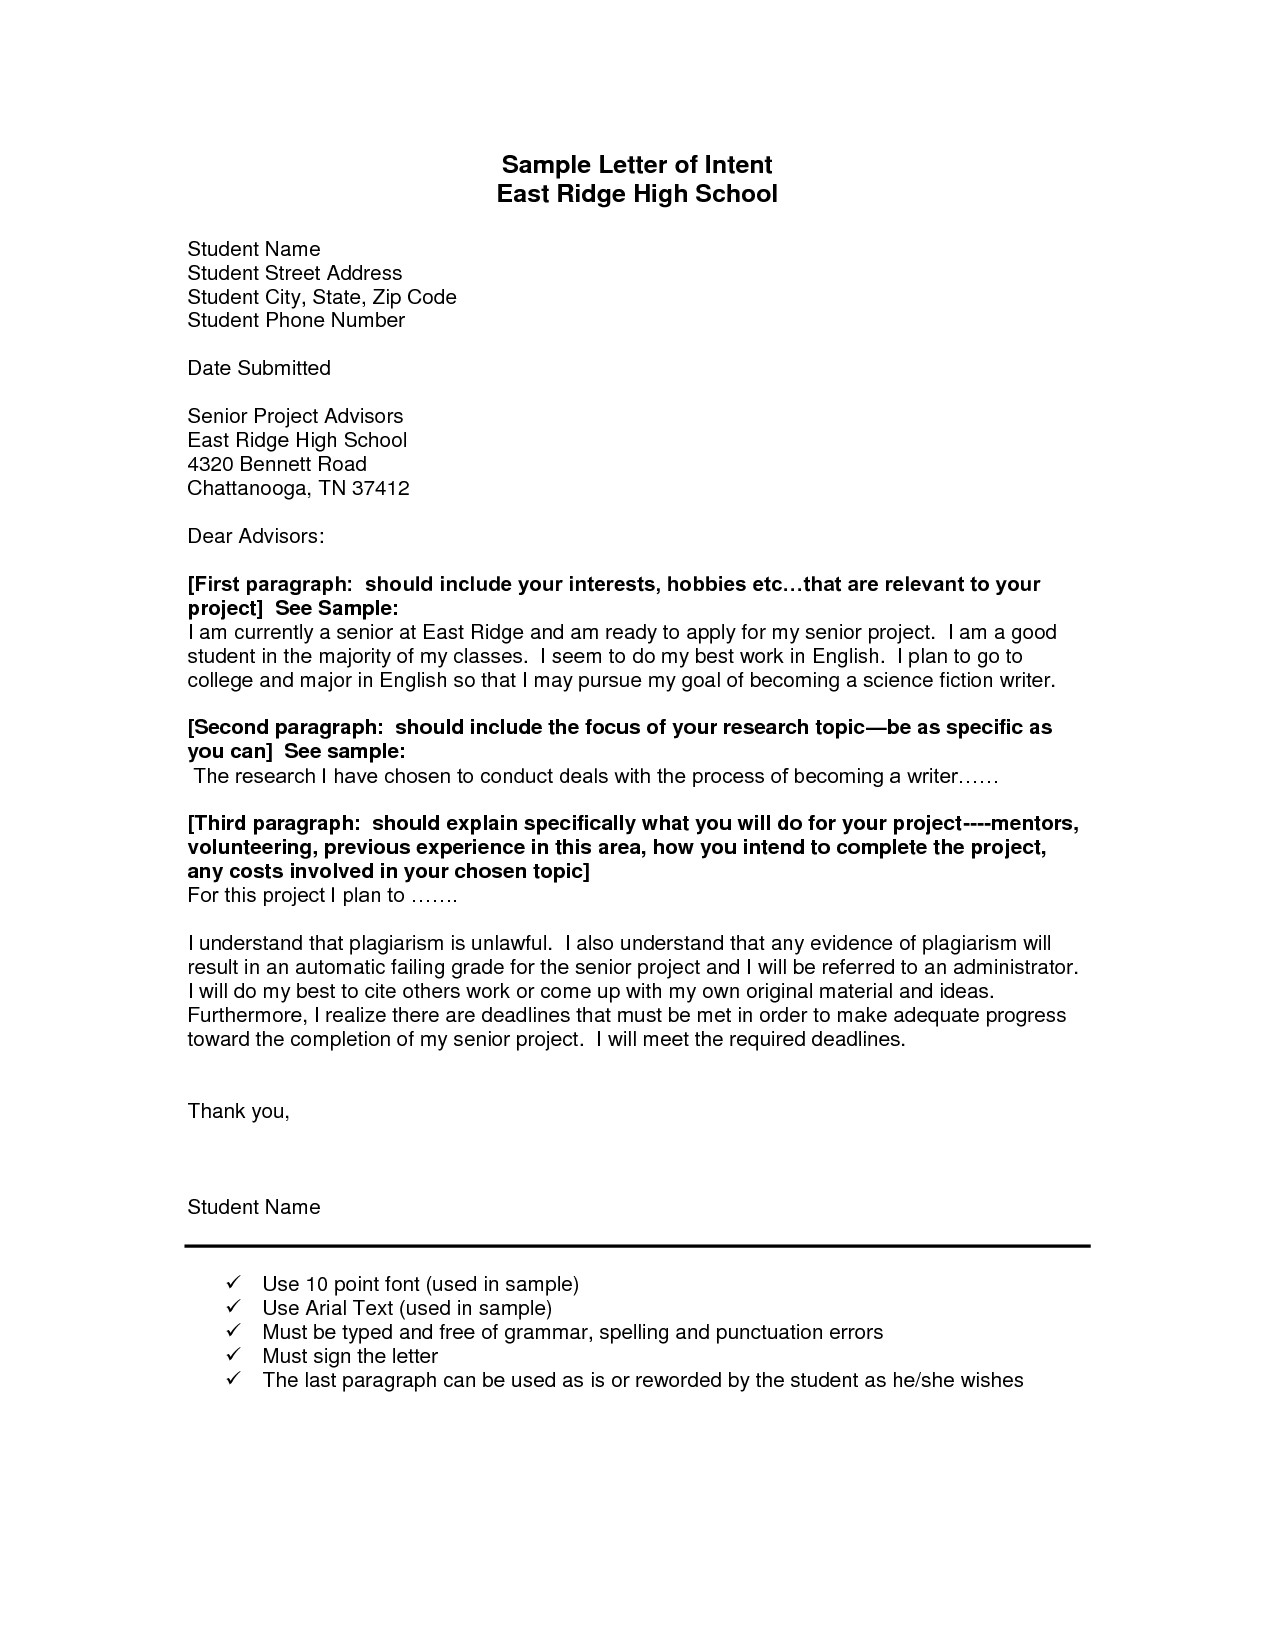 Letter Of Intent Template Microsoft Word - Business Letter Template software Best Business Letter format for